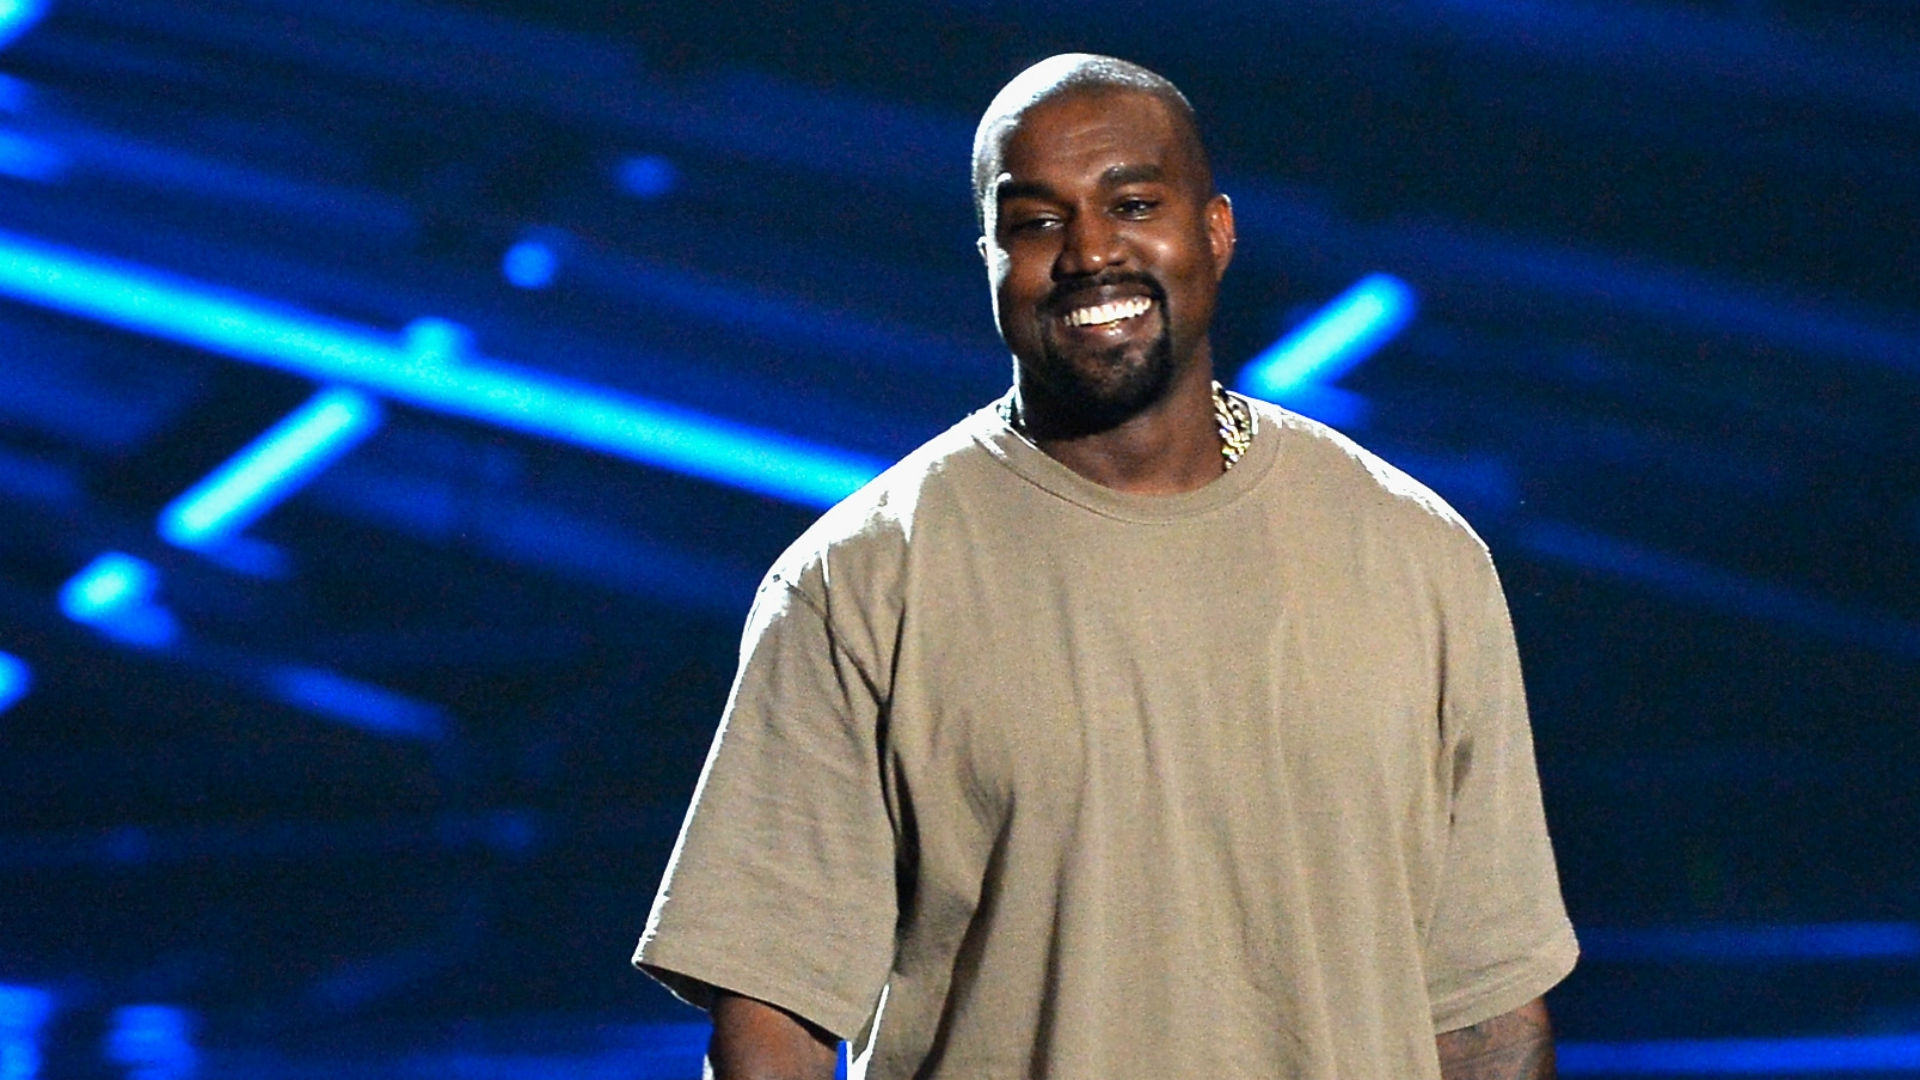 Kanye West references Swaggy P, James Harden and OBJ in new song 'Facts'